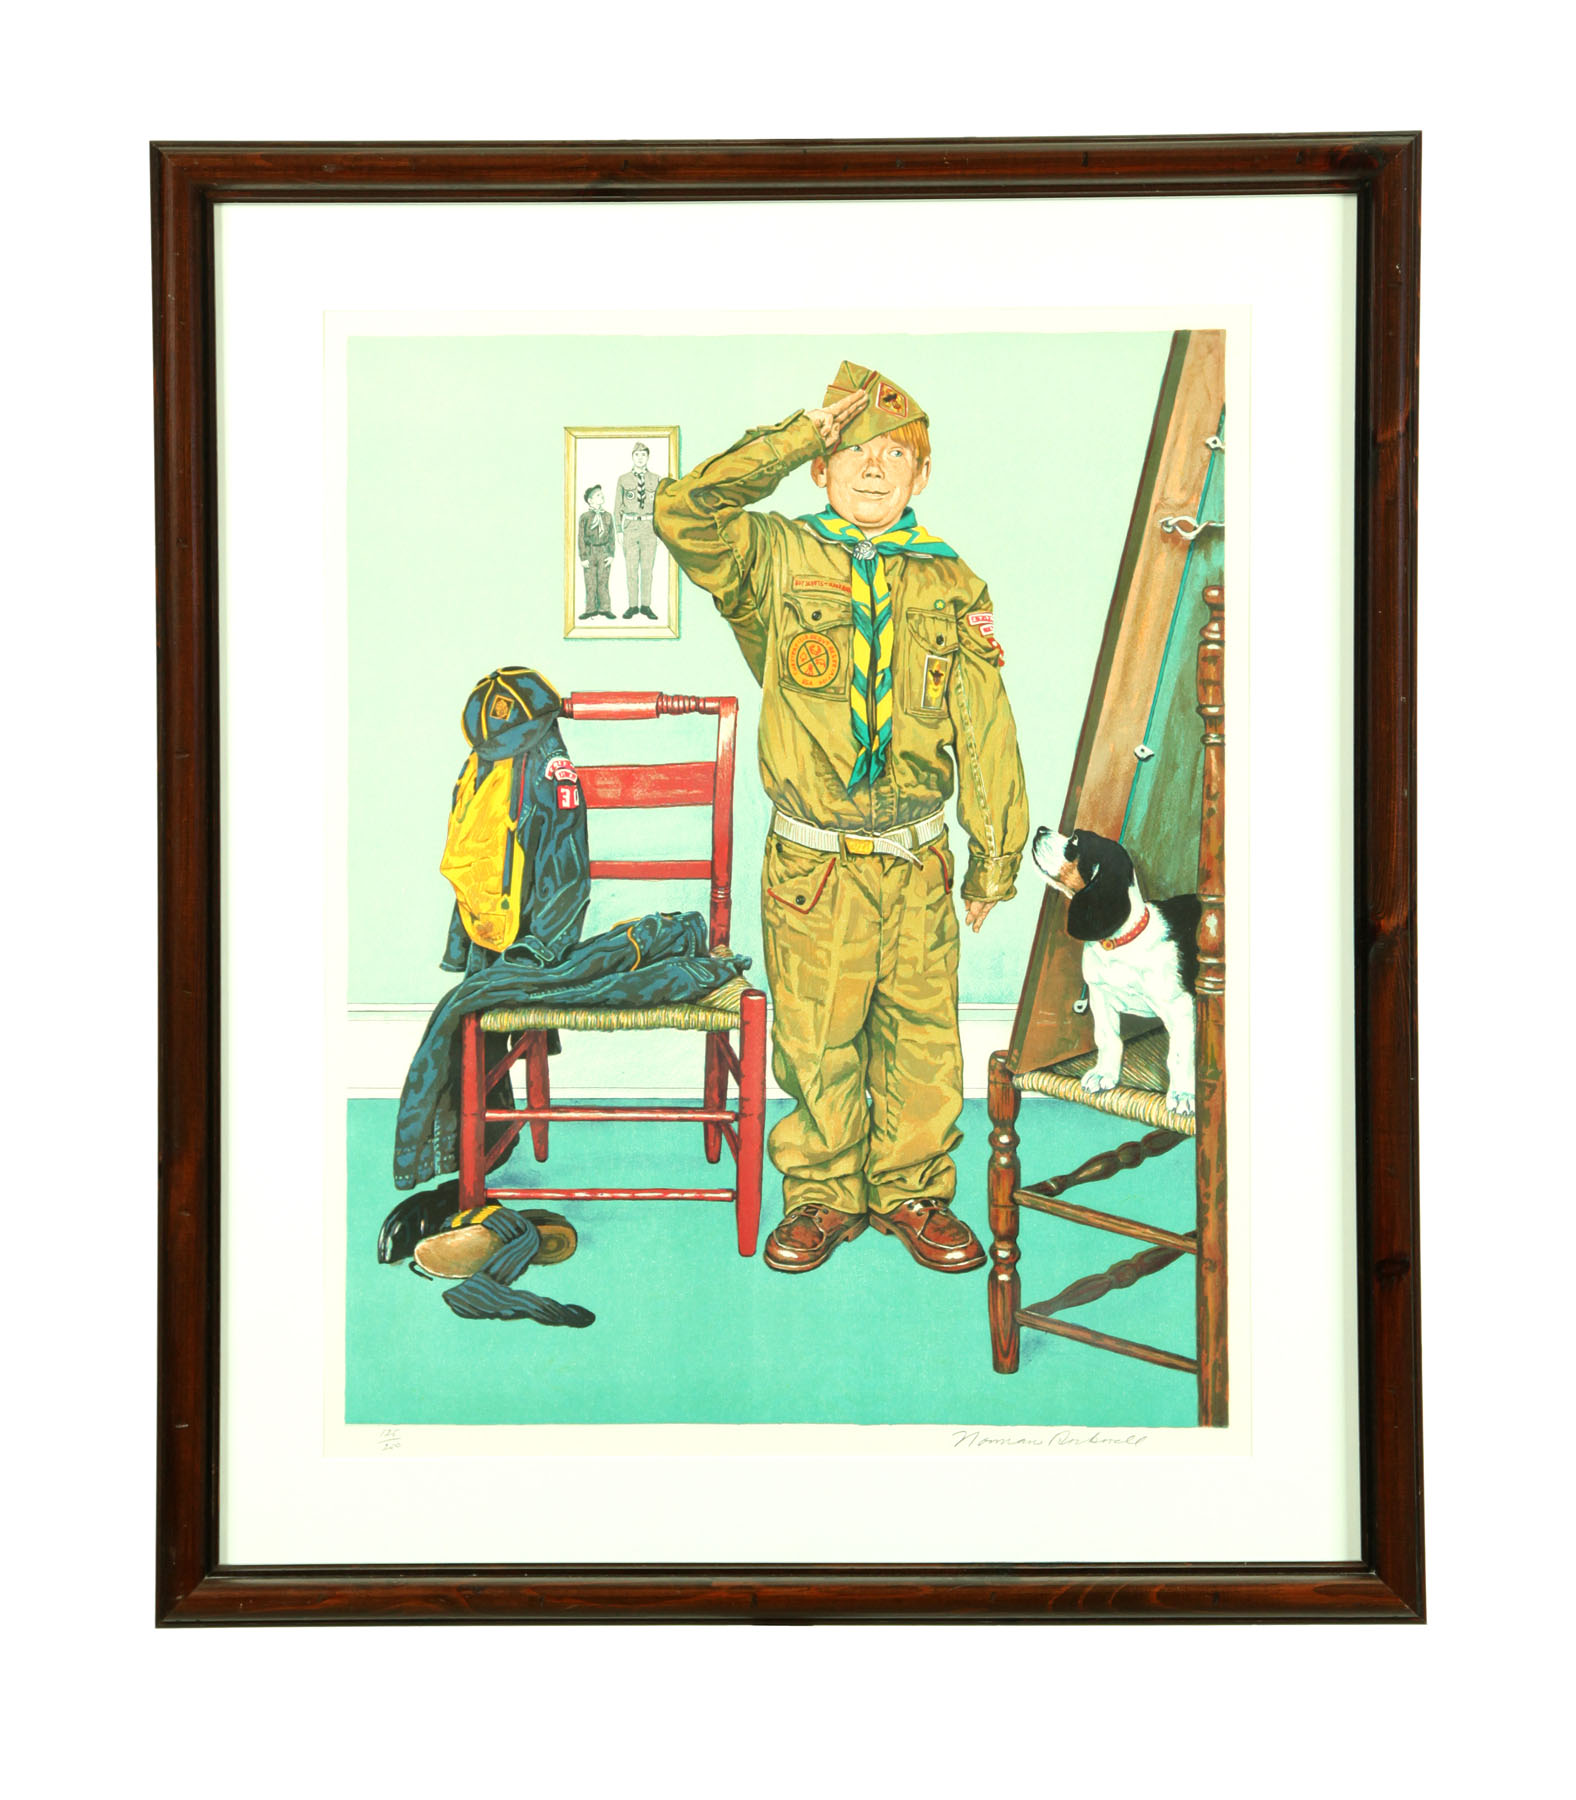 CAN T WAIT PRINT BY NORMAN ROCKWELL 117092